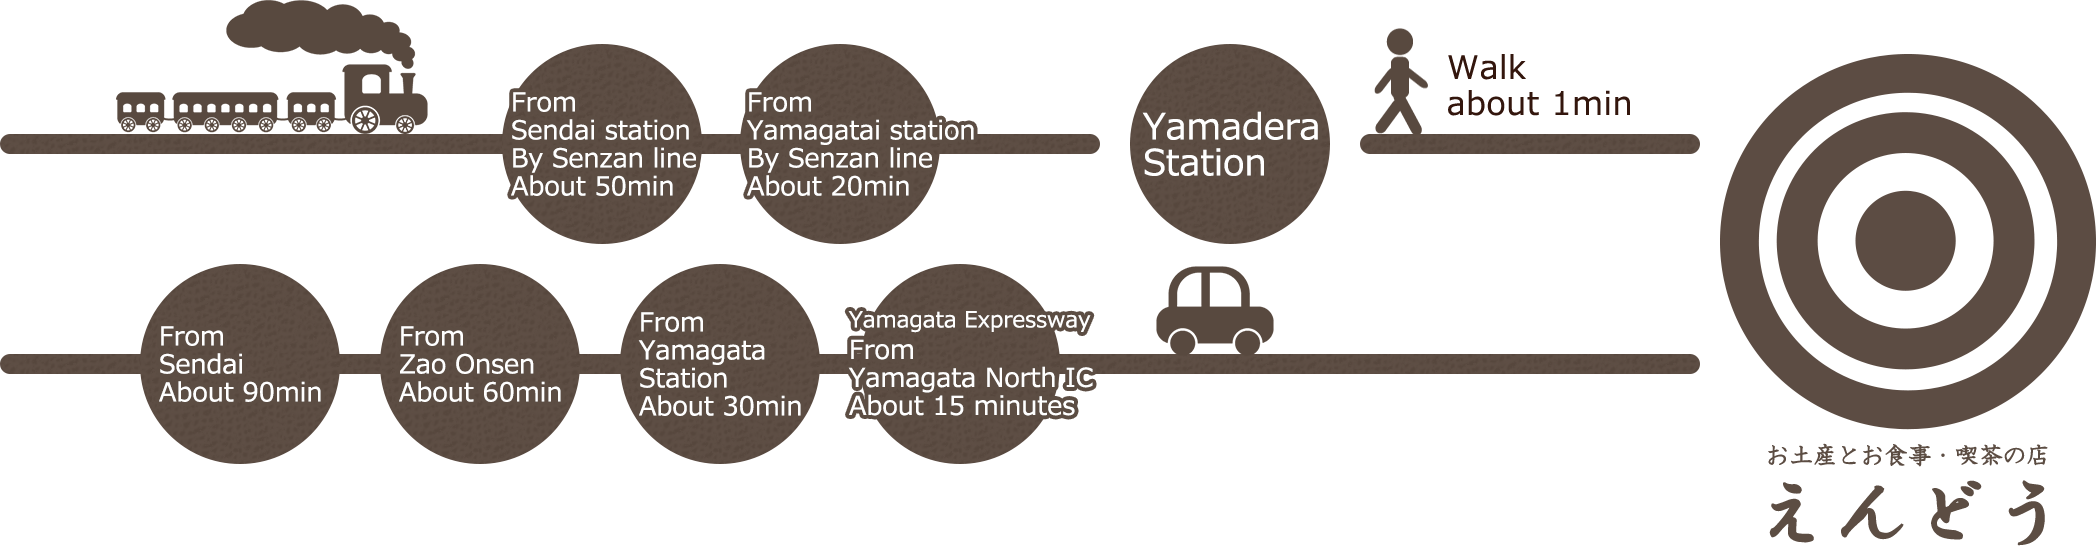 Walk 1minutes from YamaderaStation・From YamagataNorthIC About 15minutes